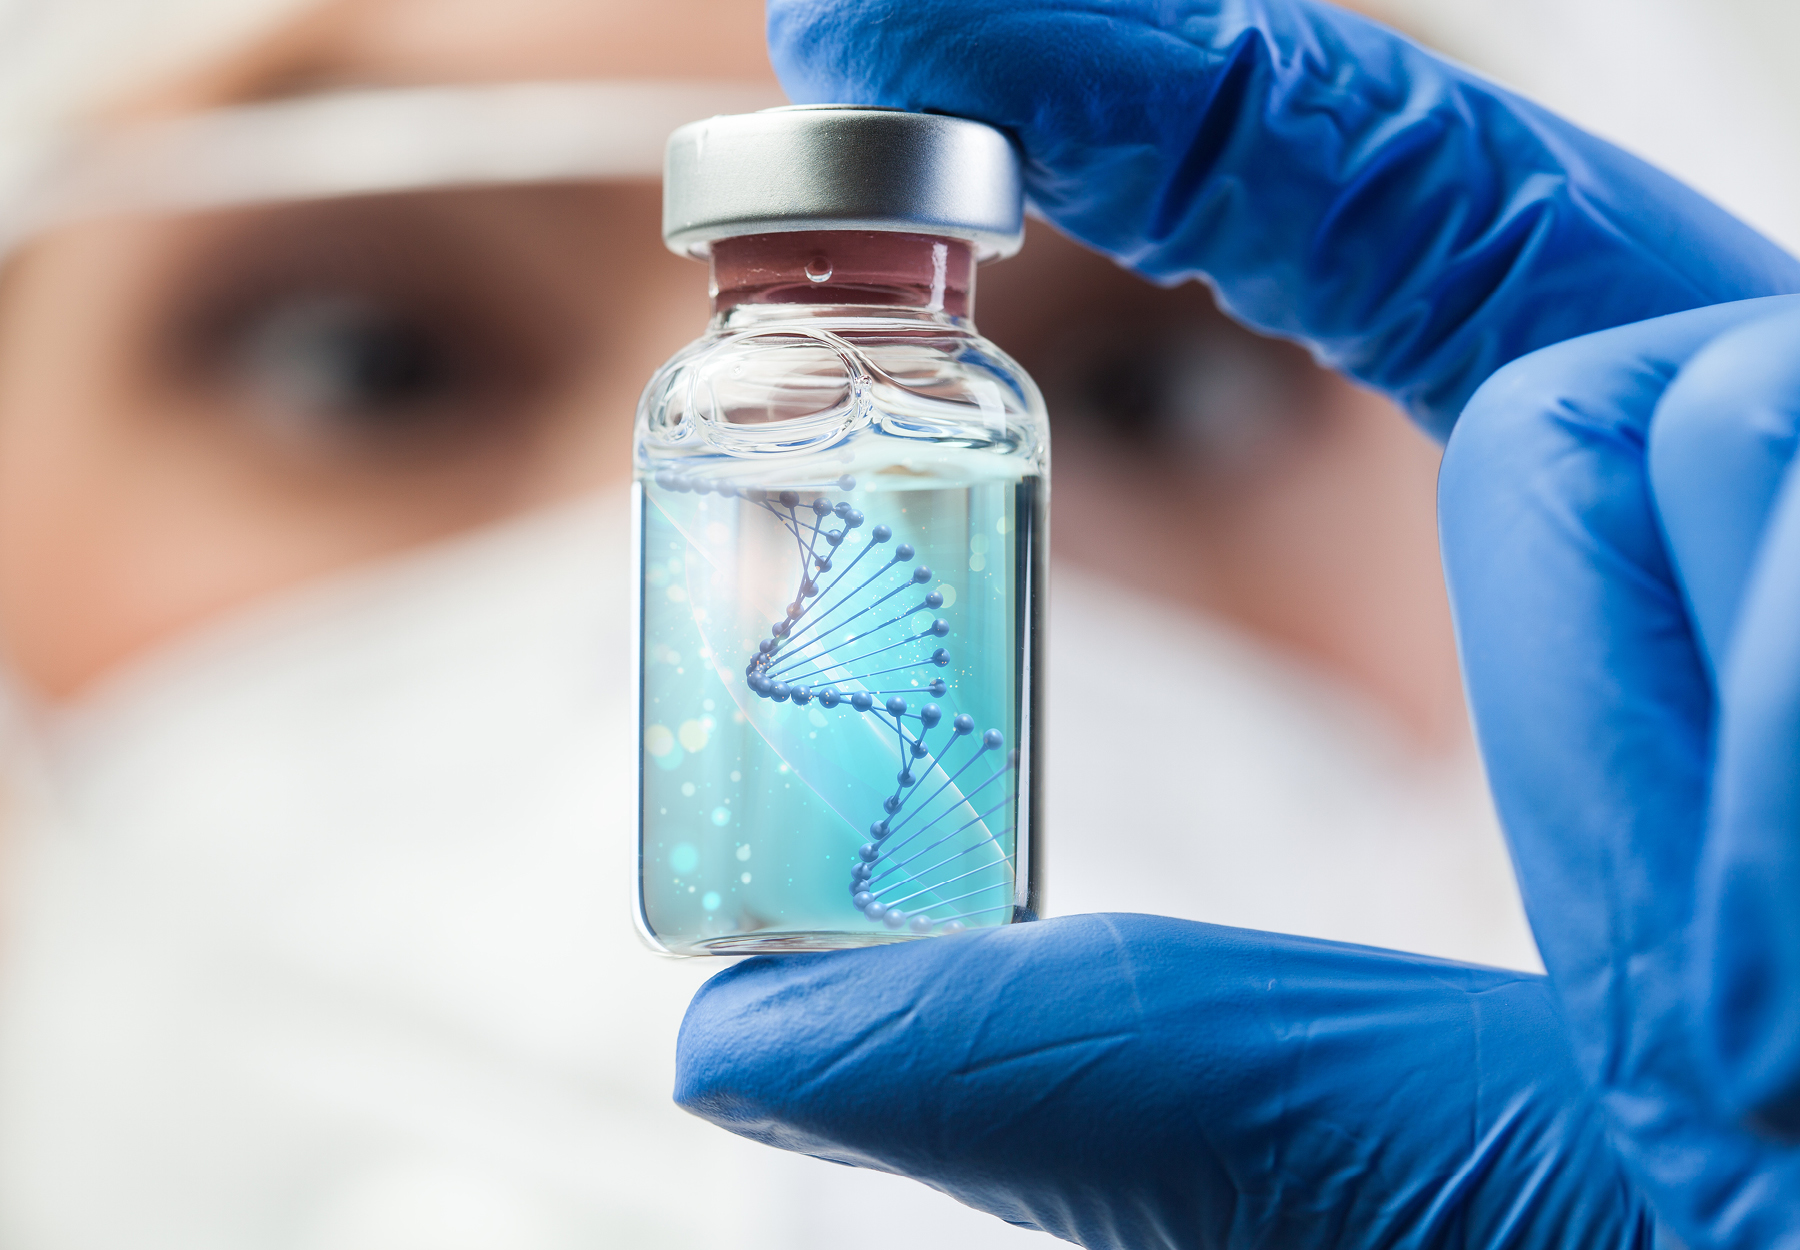 Lab scientist clinical technician biotechnologist holding glass ampoule vial with dna strand istock image